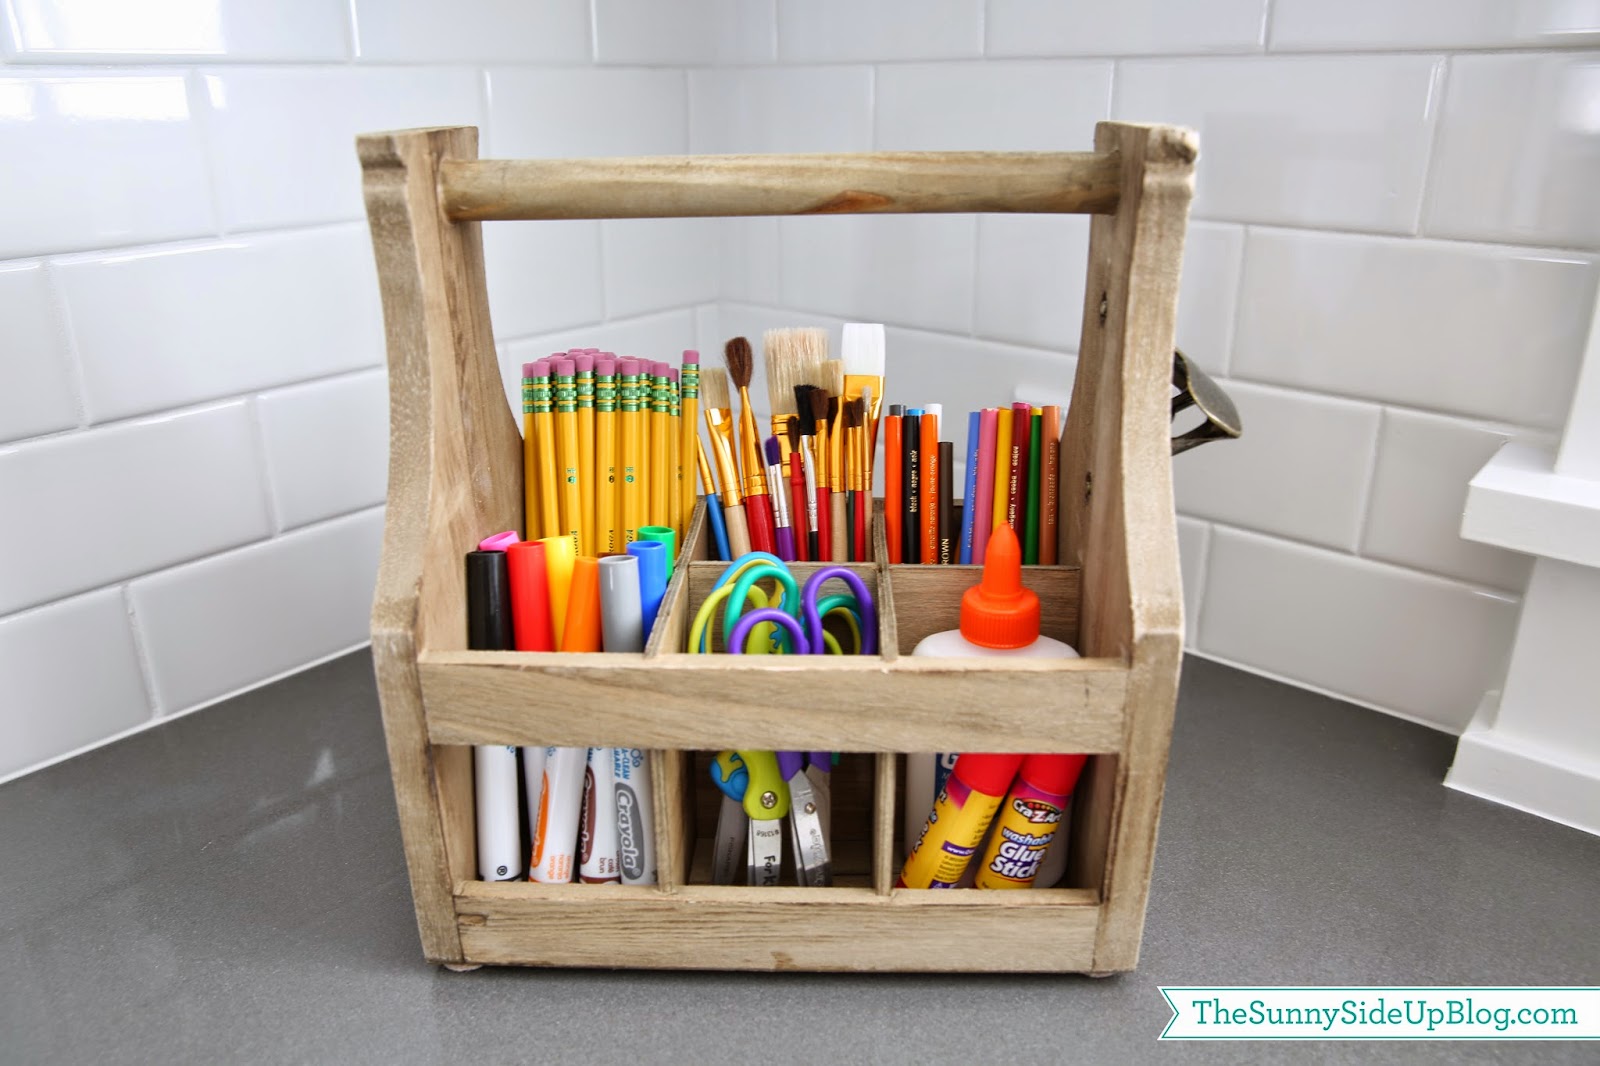 Organized art supplies (a new solution!) - The Sunny Side Up Blog